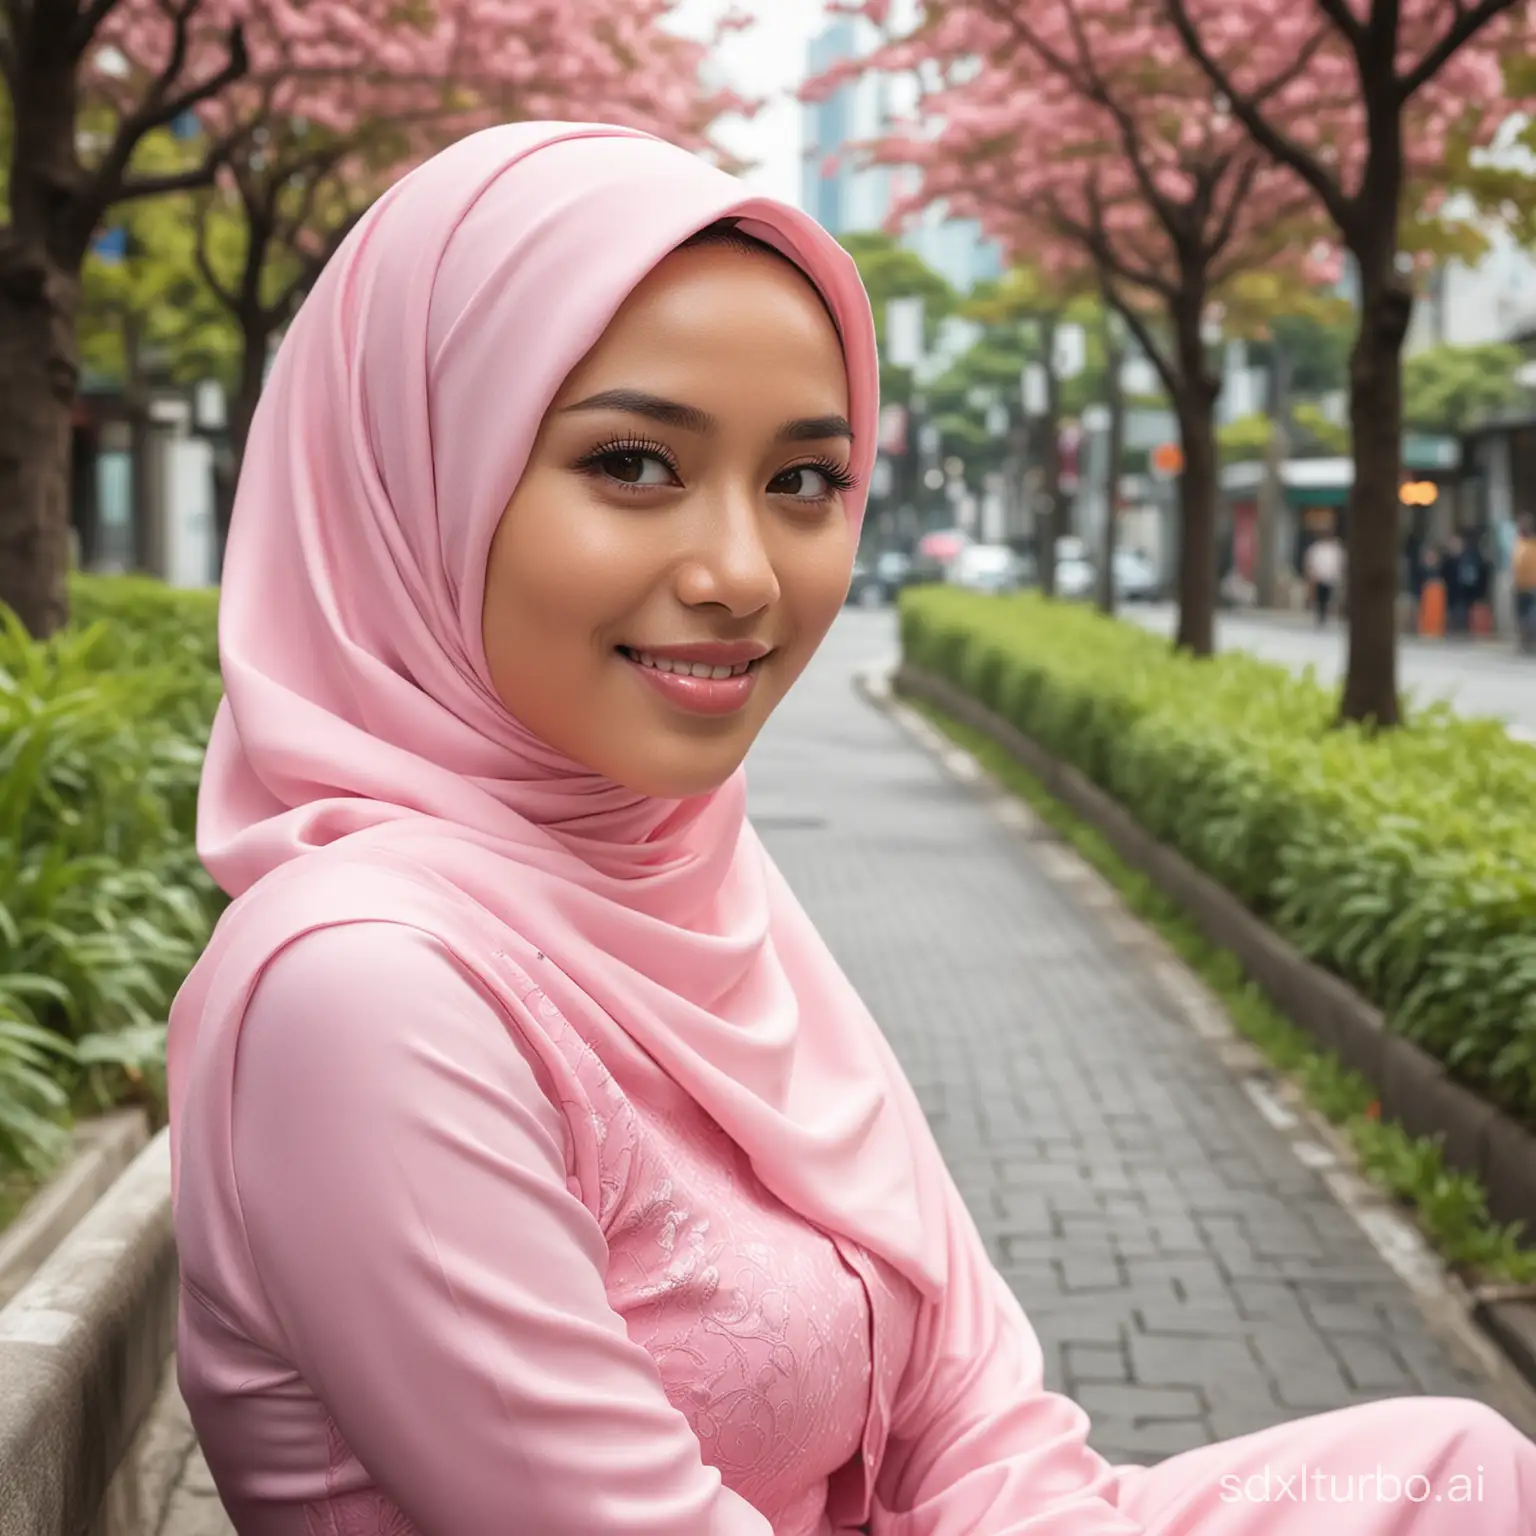 The Ultra HD 8k photo shows a very beautiful Indonesian woman with pure, shining white skin in an elegant pink dress, wearing an elegant hijab, sitting on the outskirts of Tokyo. With a smile and an expression full of feeling.